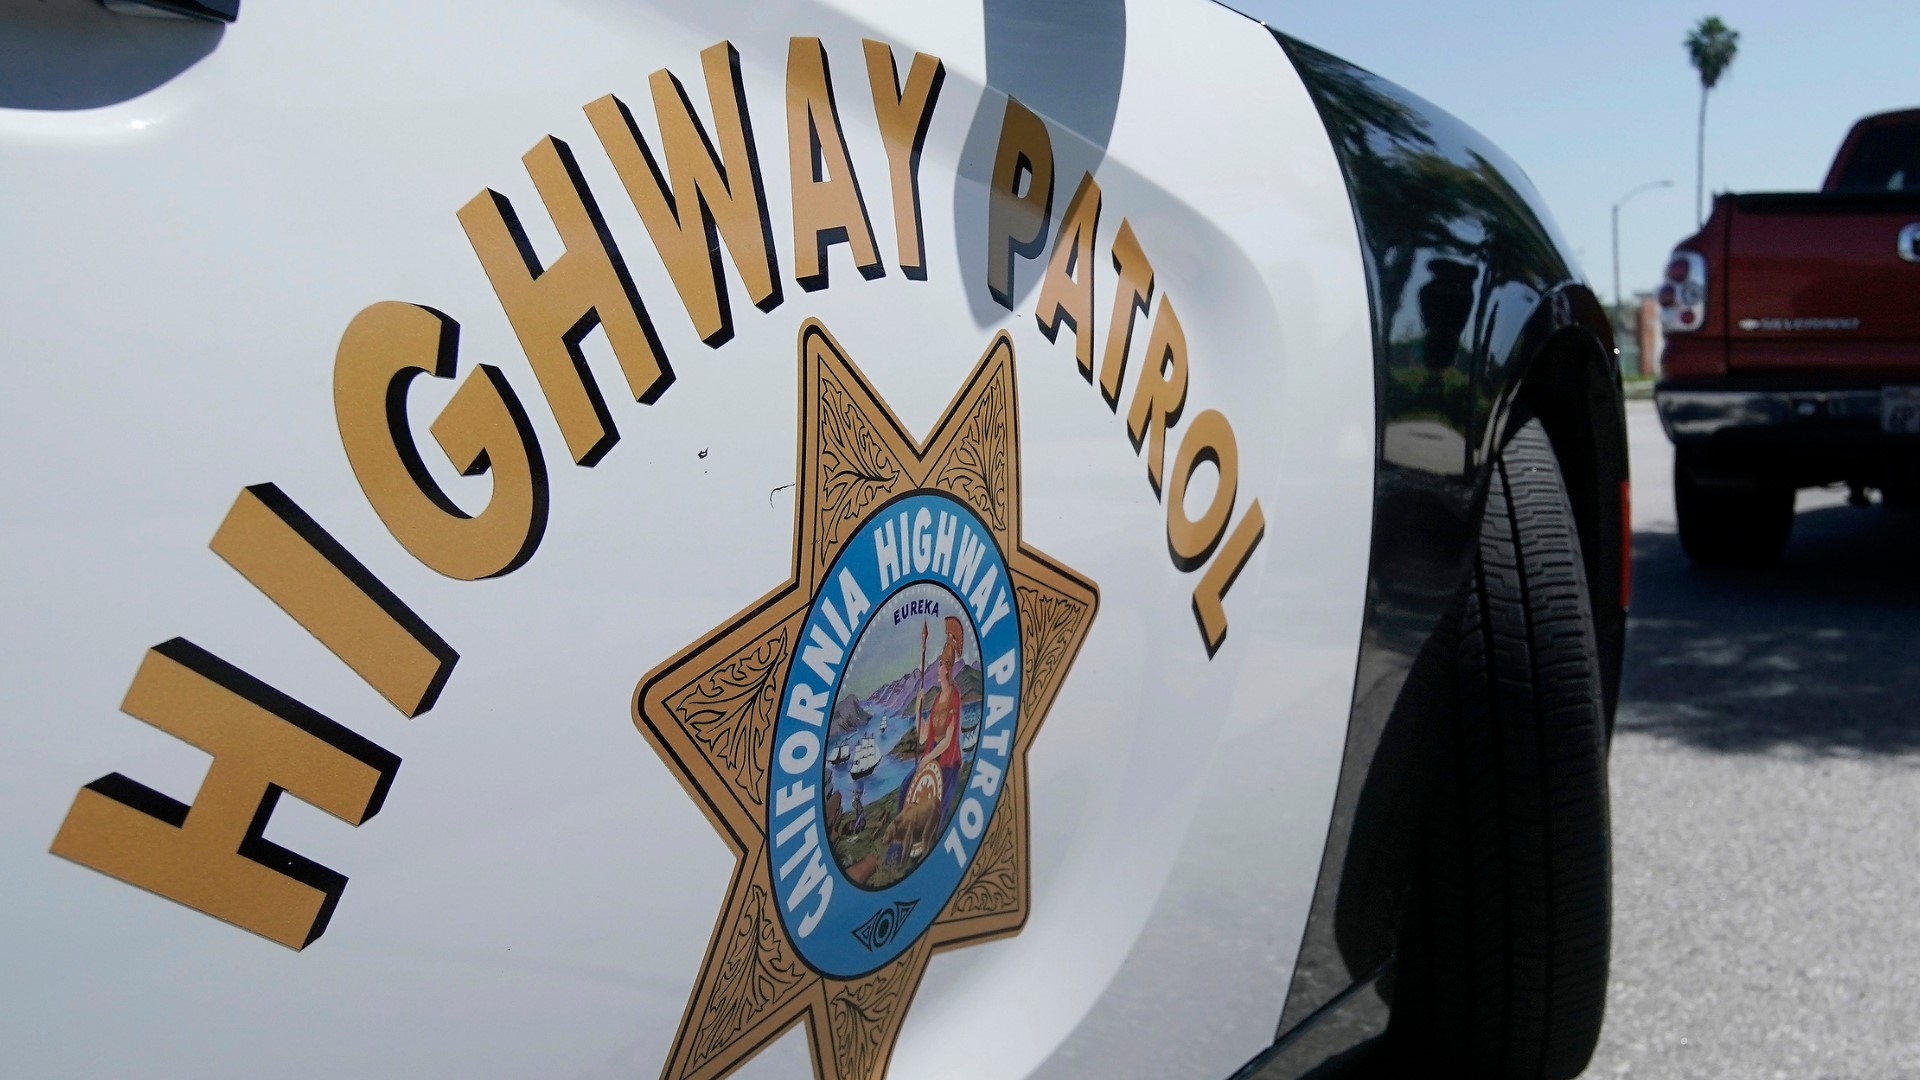 CHP said the man ran from the right shoulder of the road in front of a moving van. The van wasn't able to avoid hitting him.